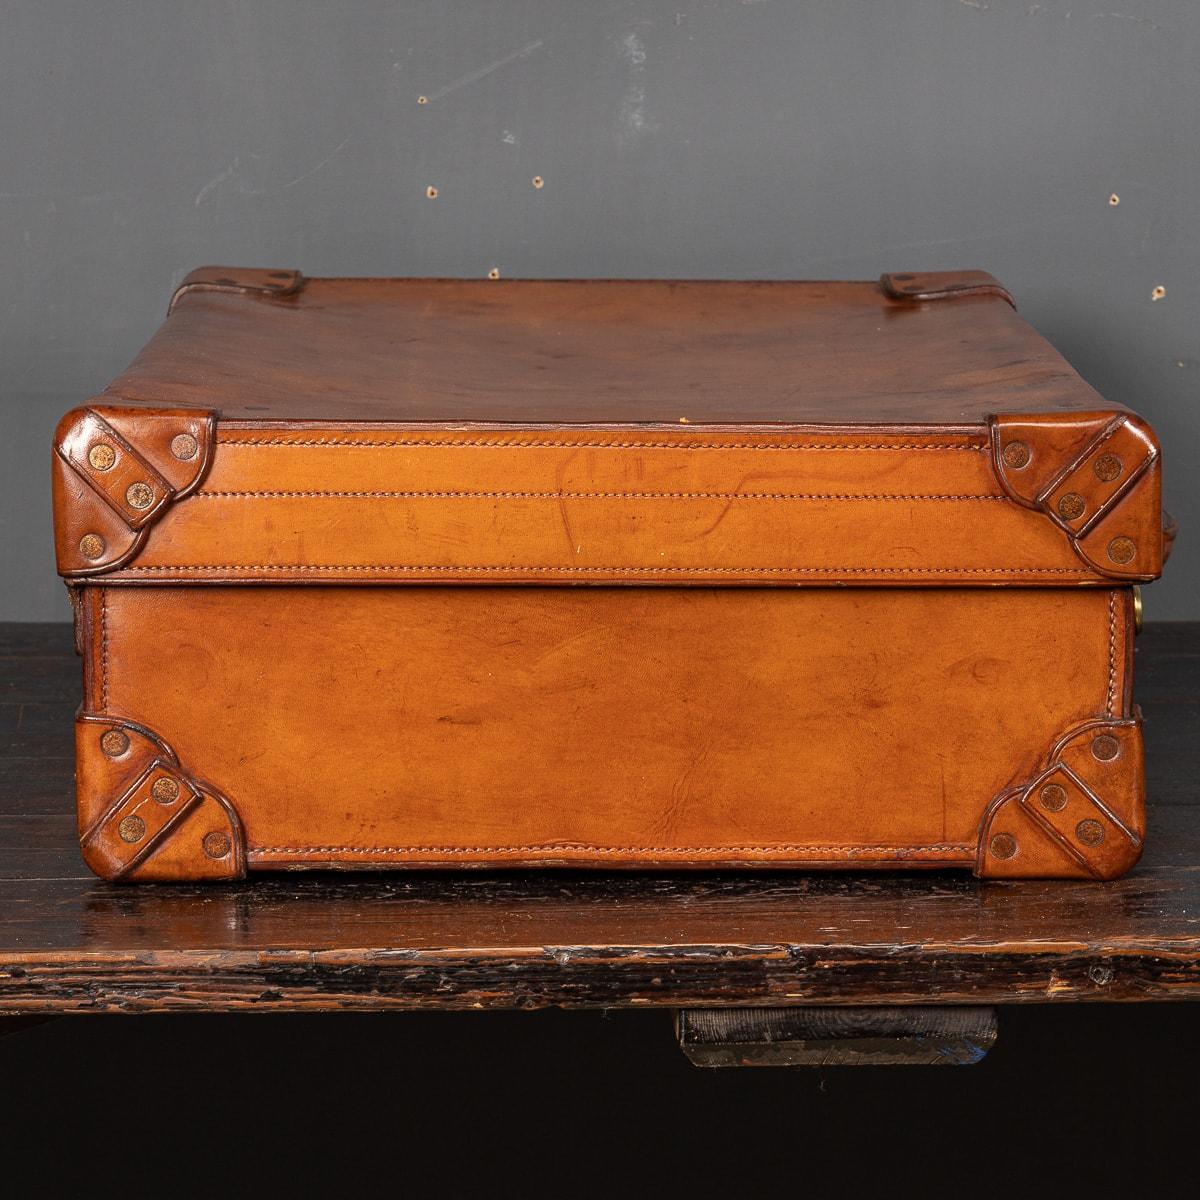 Early 20th Century An Edwardian Dressing Case With Silver Accessories By Walker & Hall c.1928 For Sale